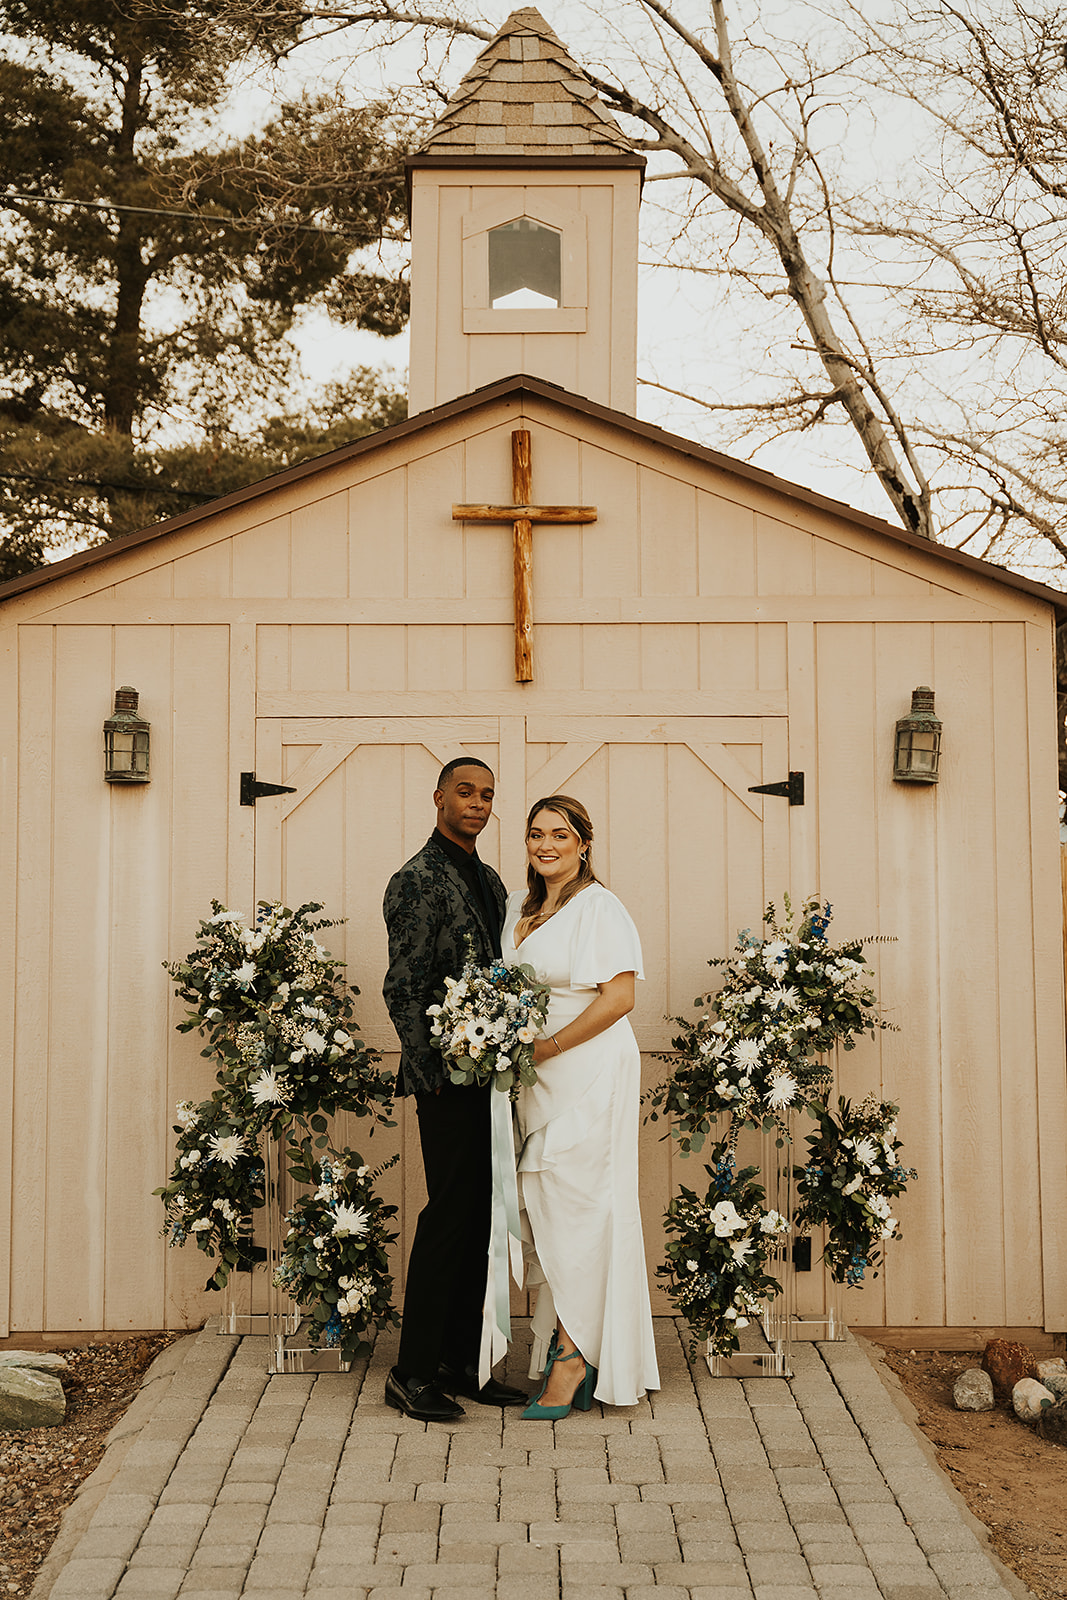 Couple posing in front of chapel during their elopement prepared by Elopement Las Vegas